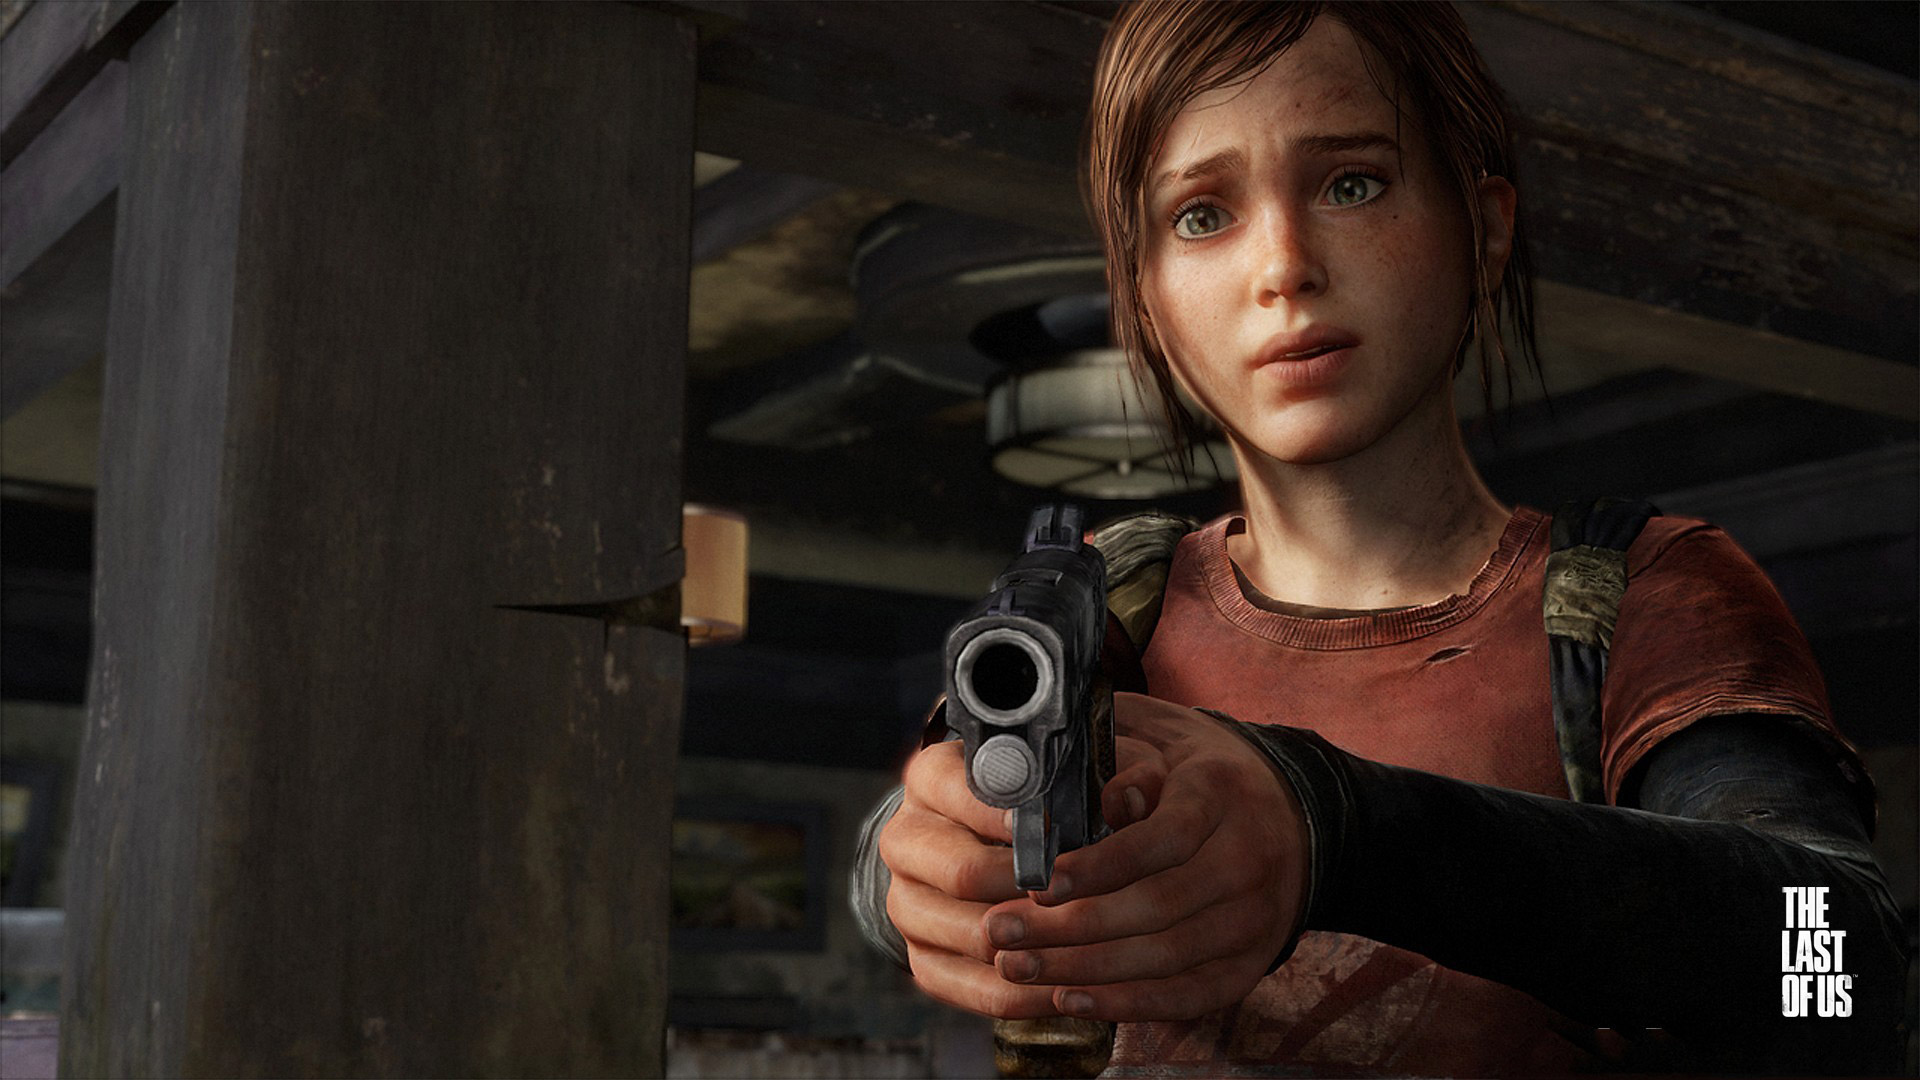 the last of us wallpaper,shooter game,digital compositing,adventure game,screenshot,action adventure game